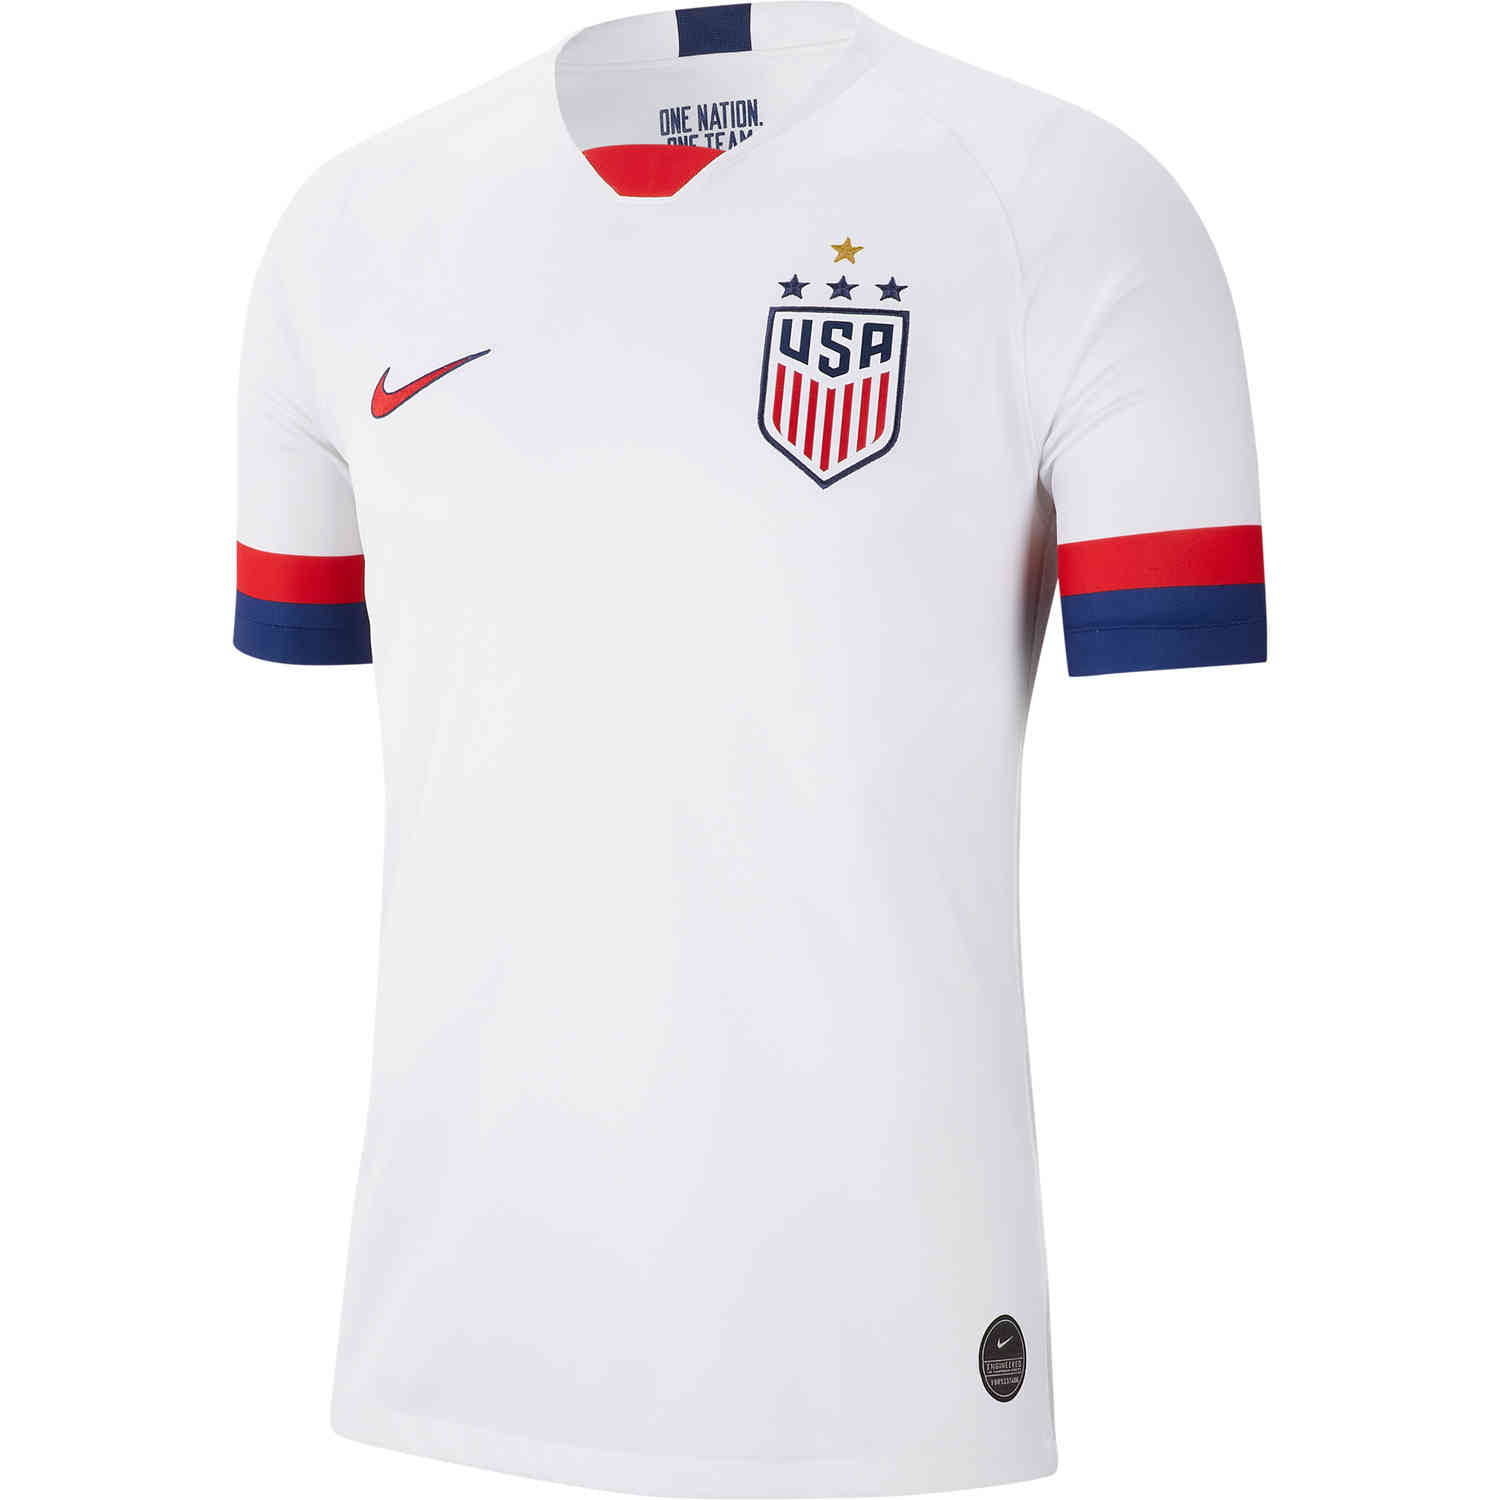 Nike 4-Star USWNT Home Jersey - 2019 